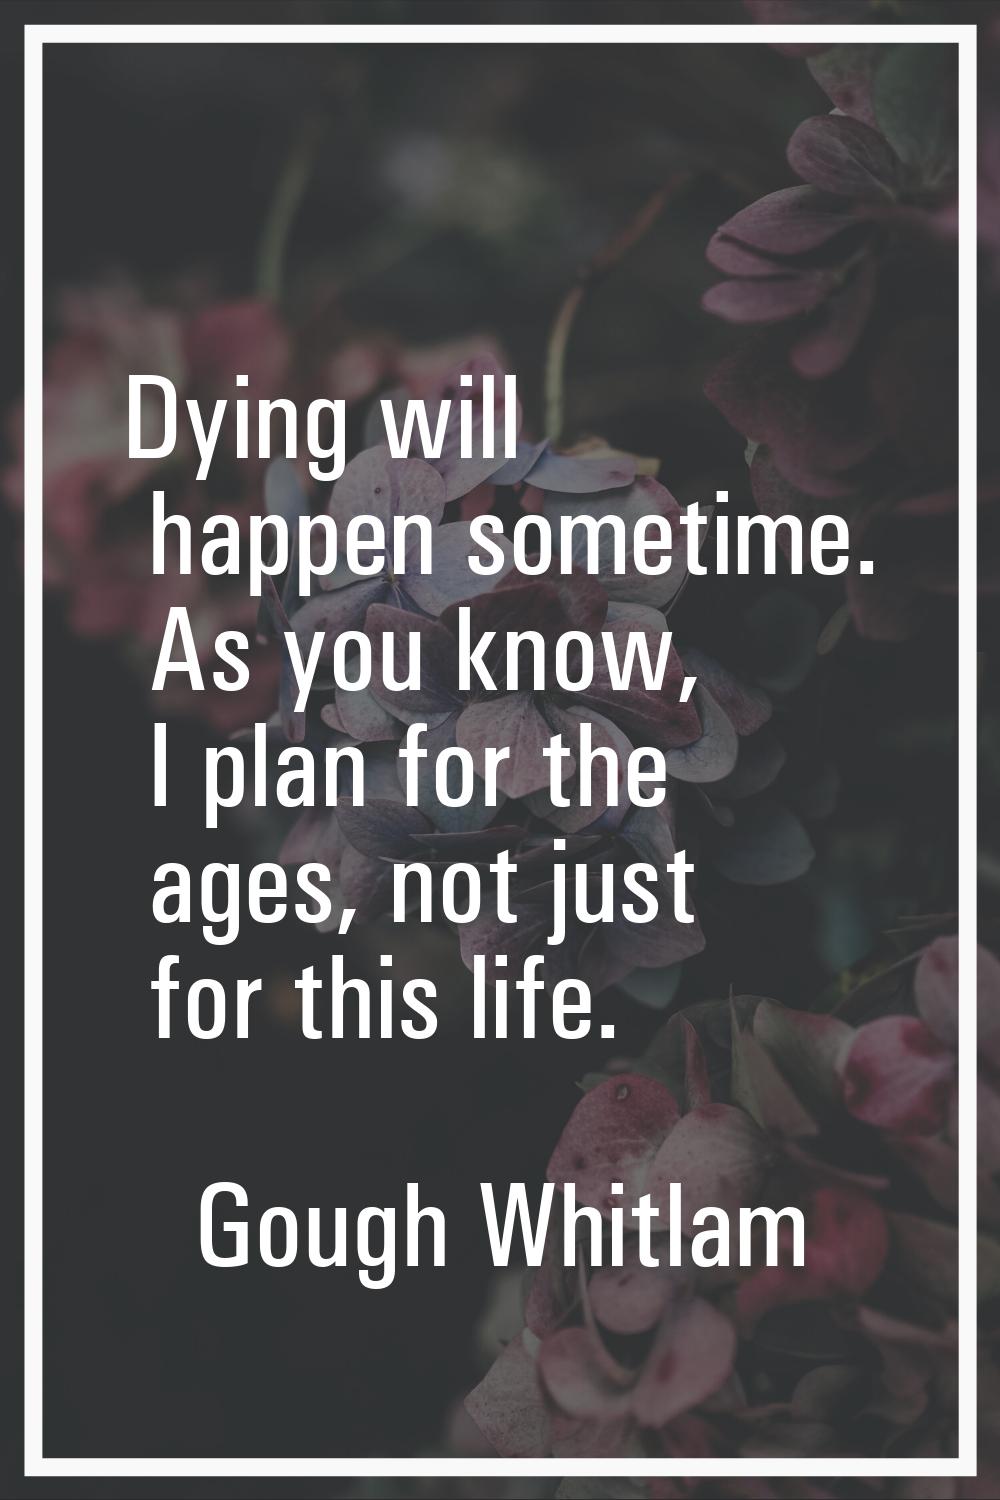 Dying will happen sometime. As you know, I plan for the ages, not just for this life.